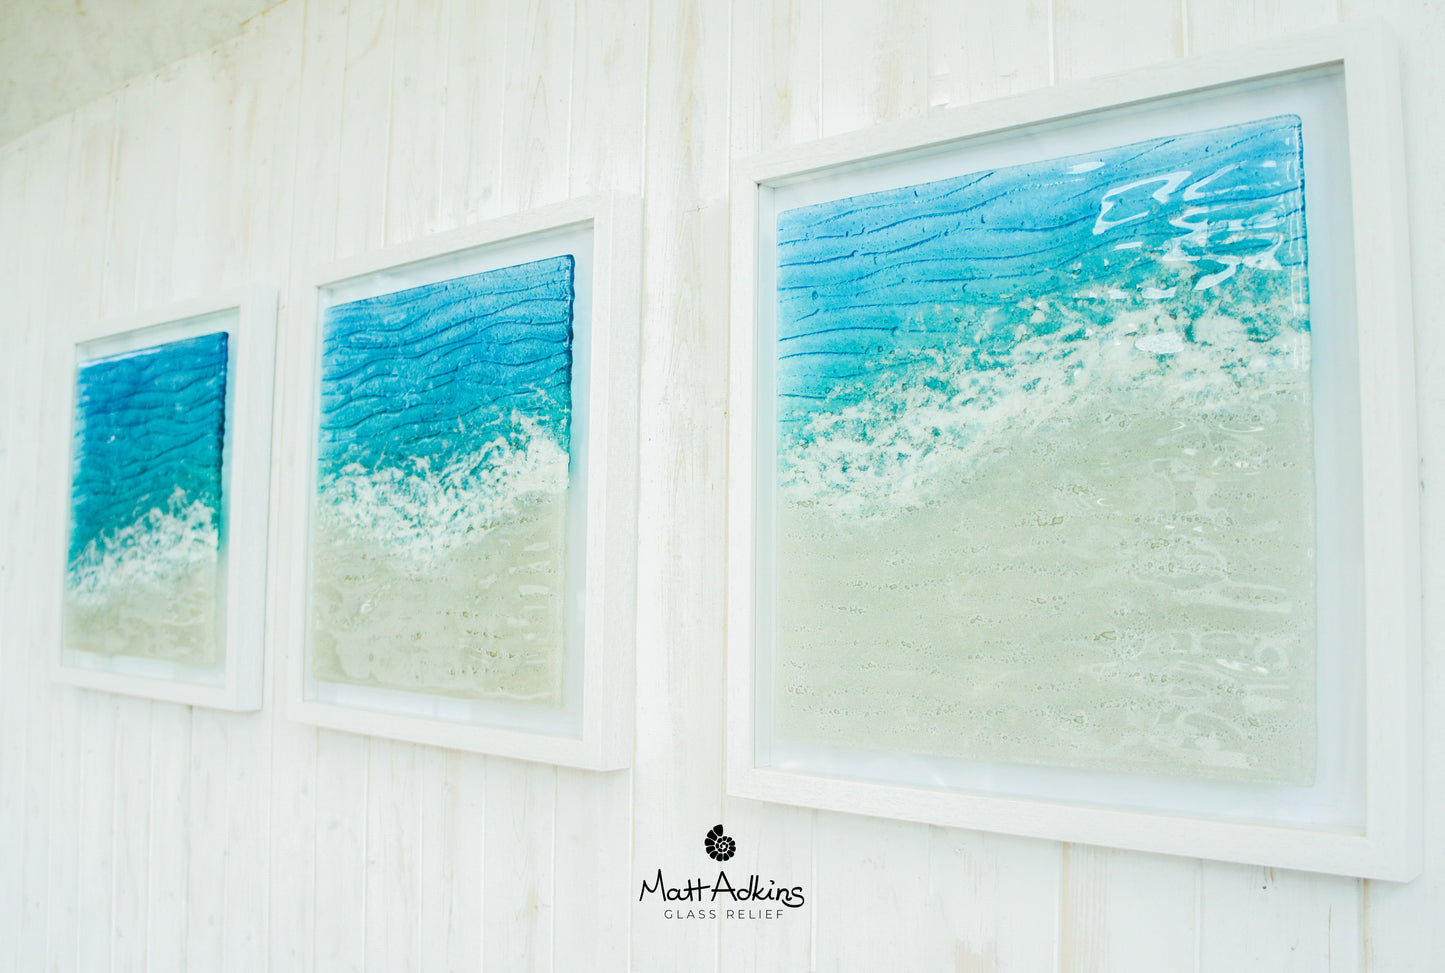 Triptych of Paradise Large Square Frames - 3 Frames at 45x45cm each (17x17")